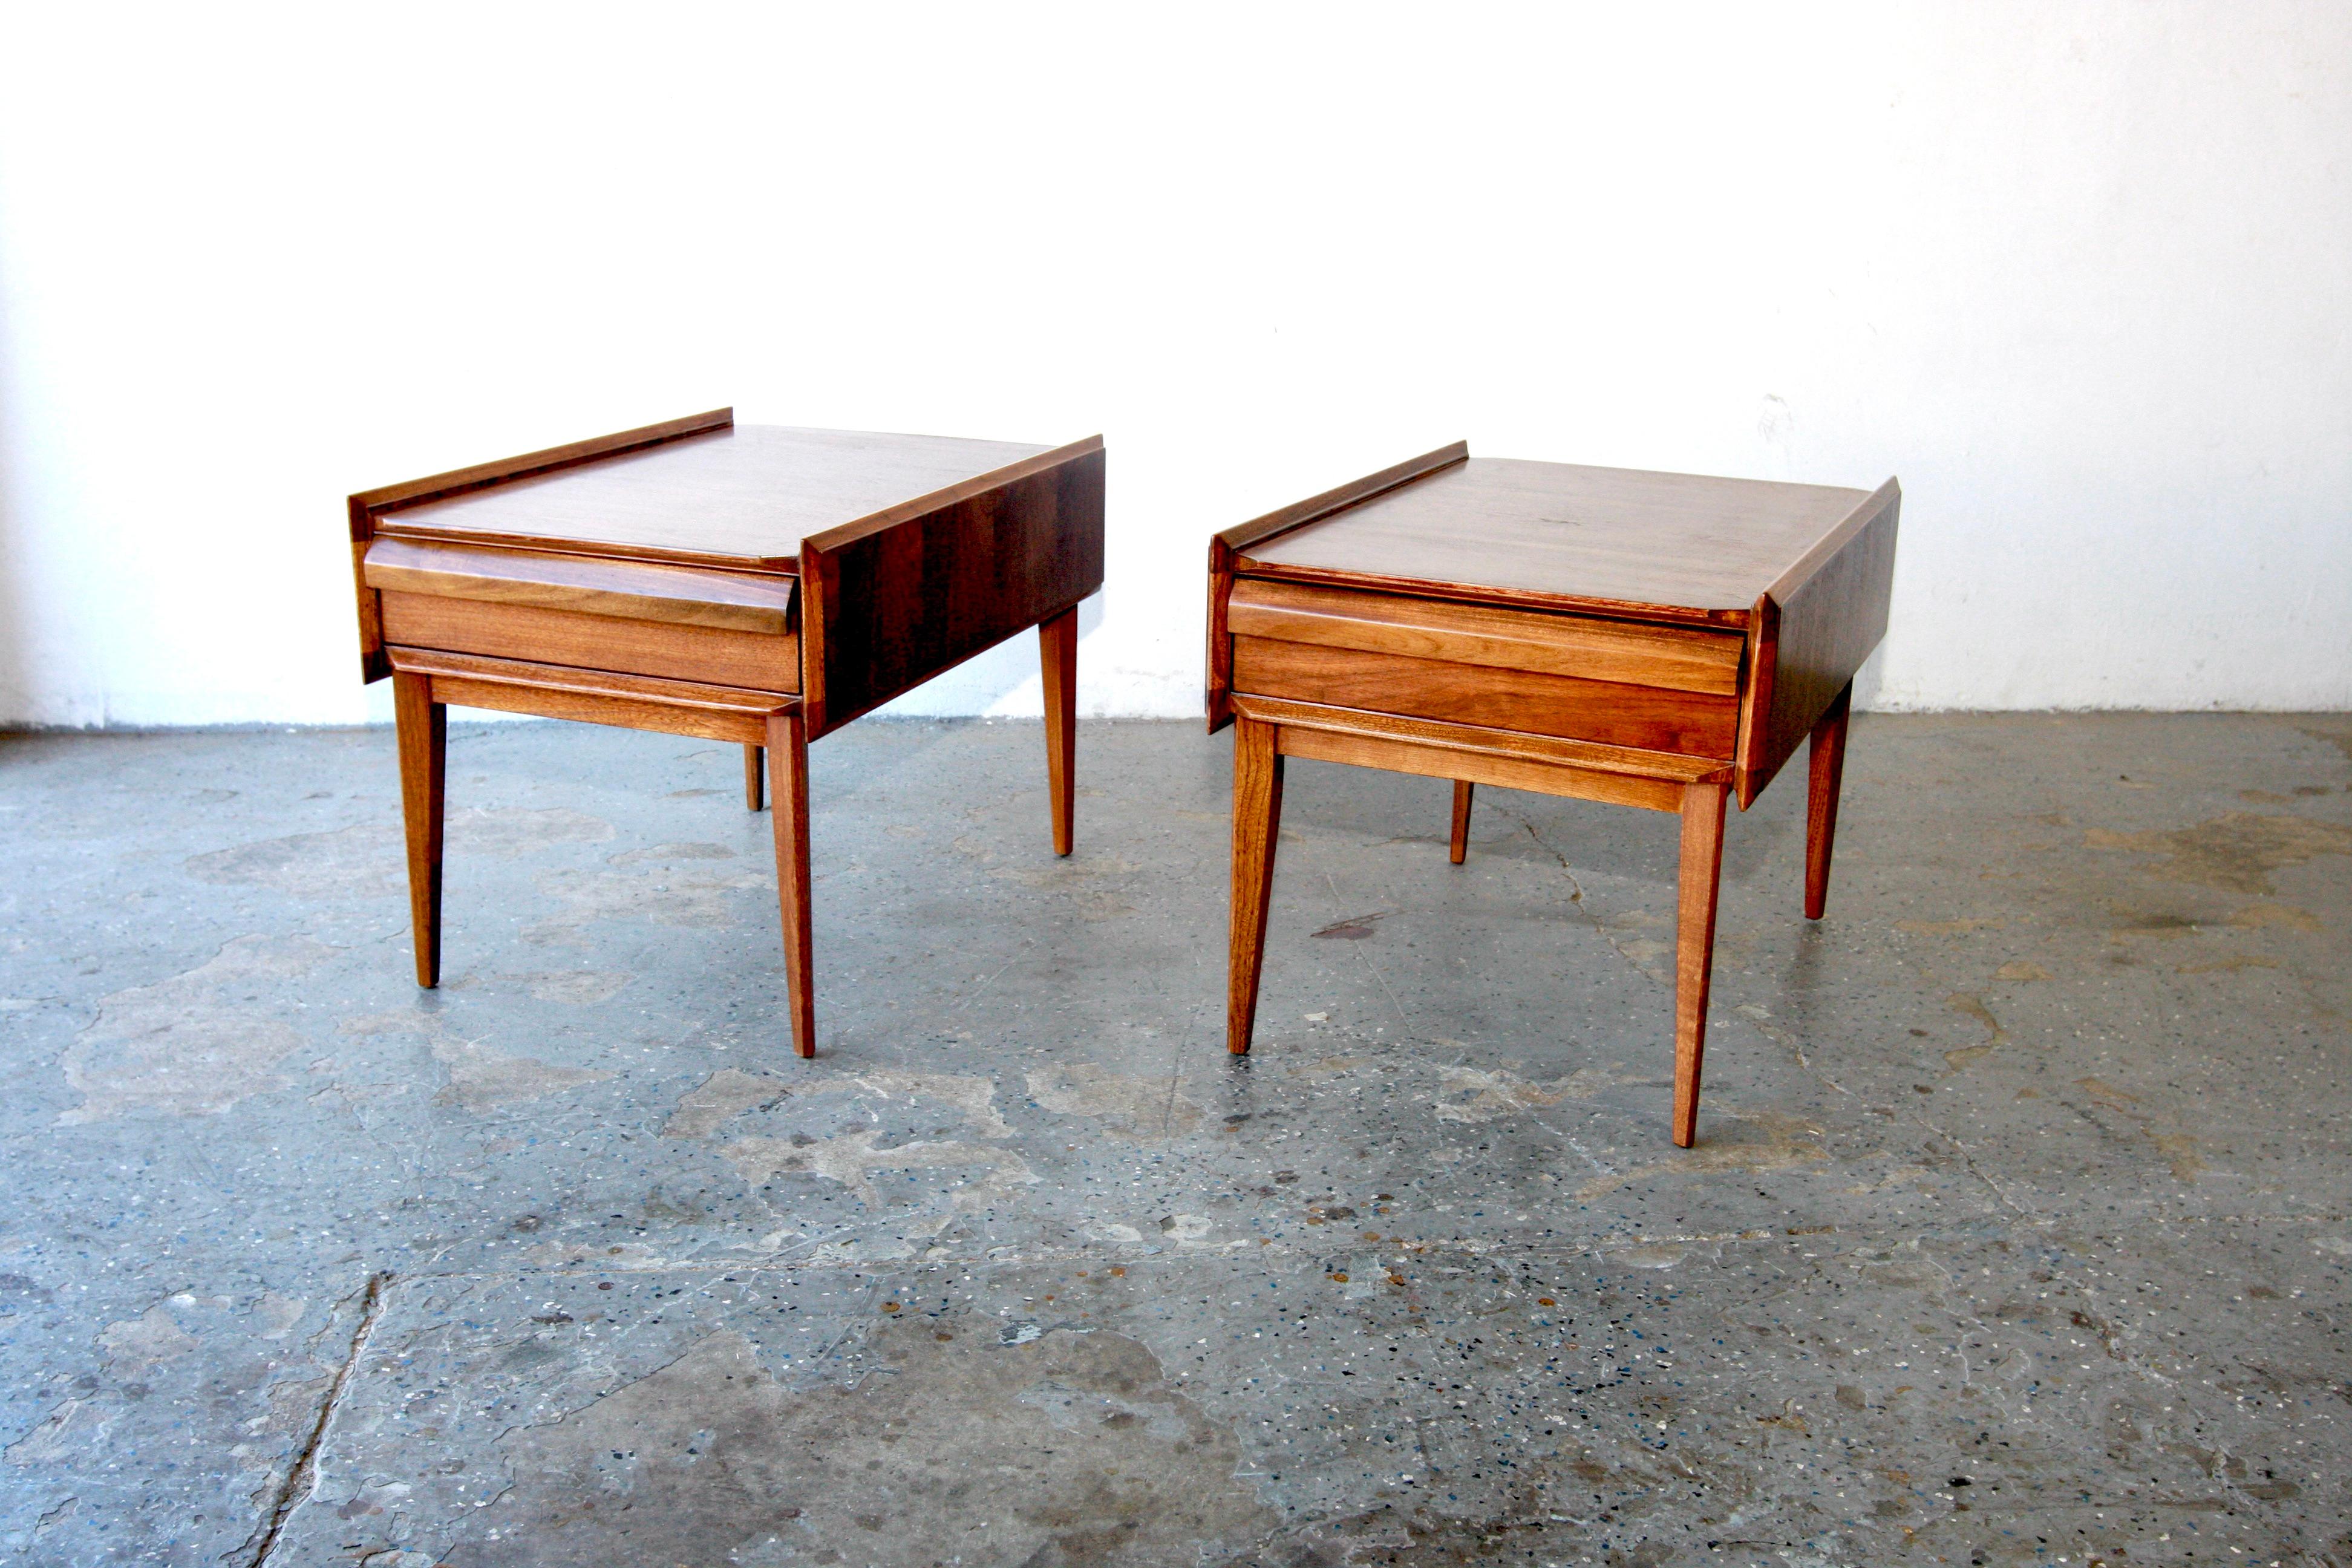 This eclectic pair of walnut end tables designed by Andre Bus for the First Edition Collection by Lane C. 1966 features sharp angles, built up sides and a sculpted drawer front.  Because of its Danish influence, this line is also known as the